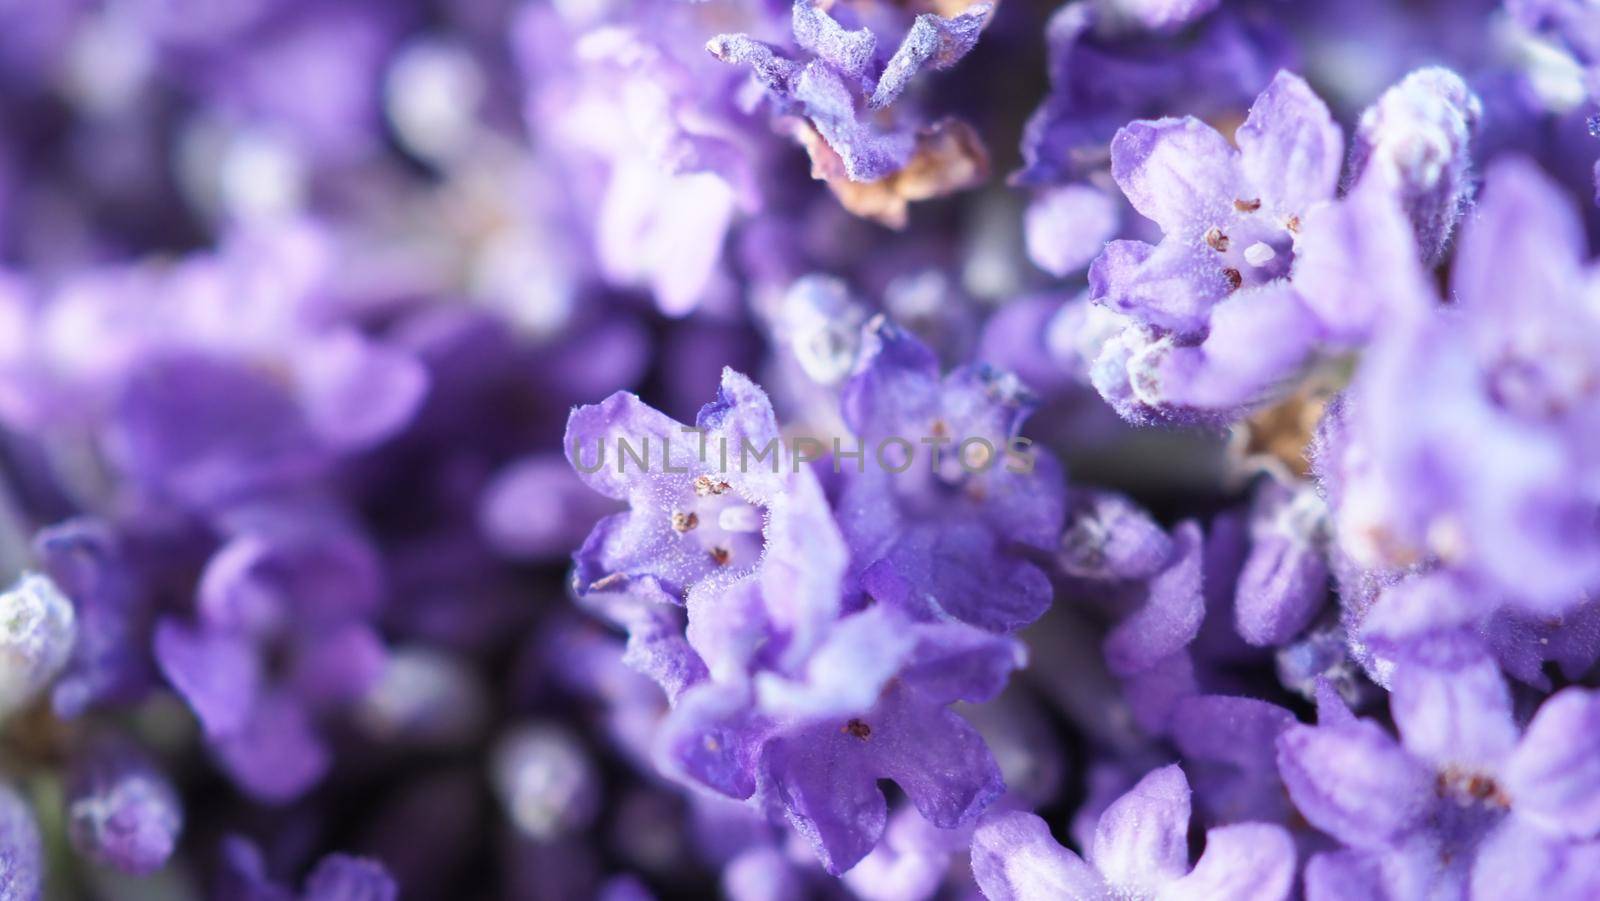 Bunch or bouquet of purple lavender flowers on a wood texture table.  by gnepphoto